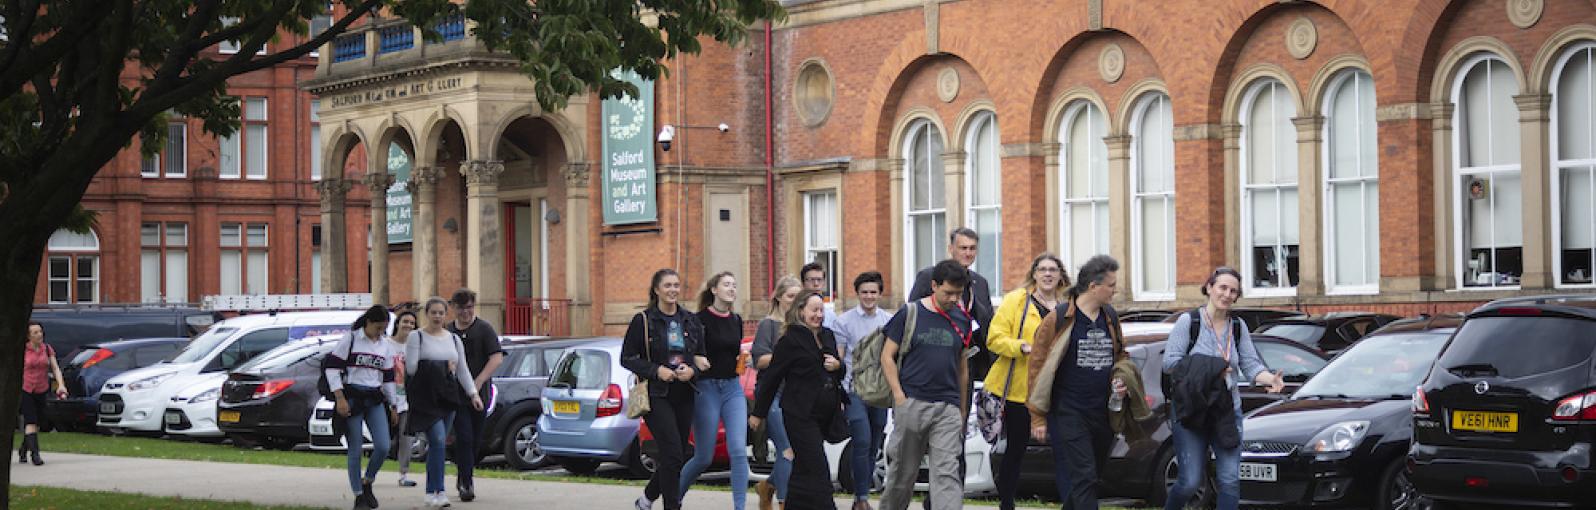 Students on a campus tour on the University of Salford Peel Park campus